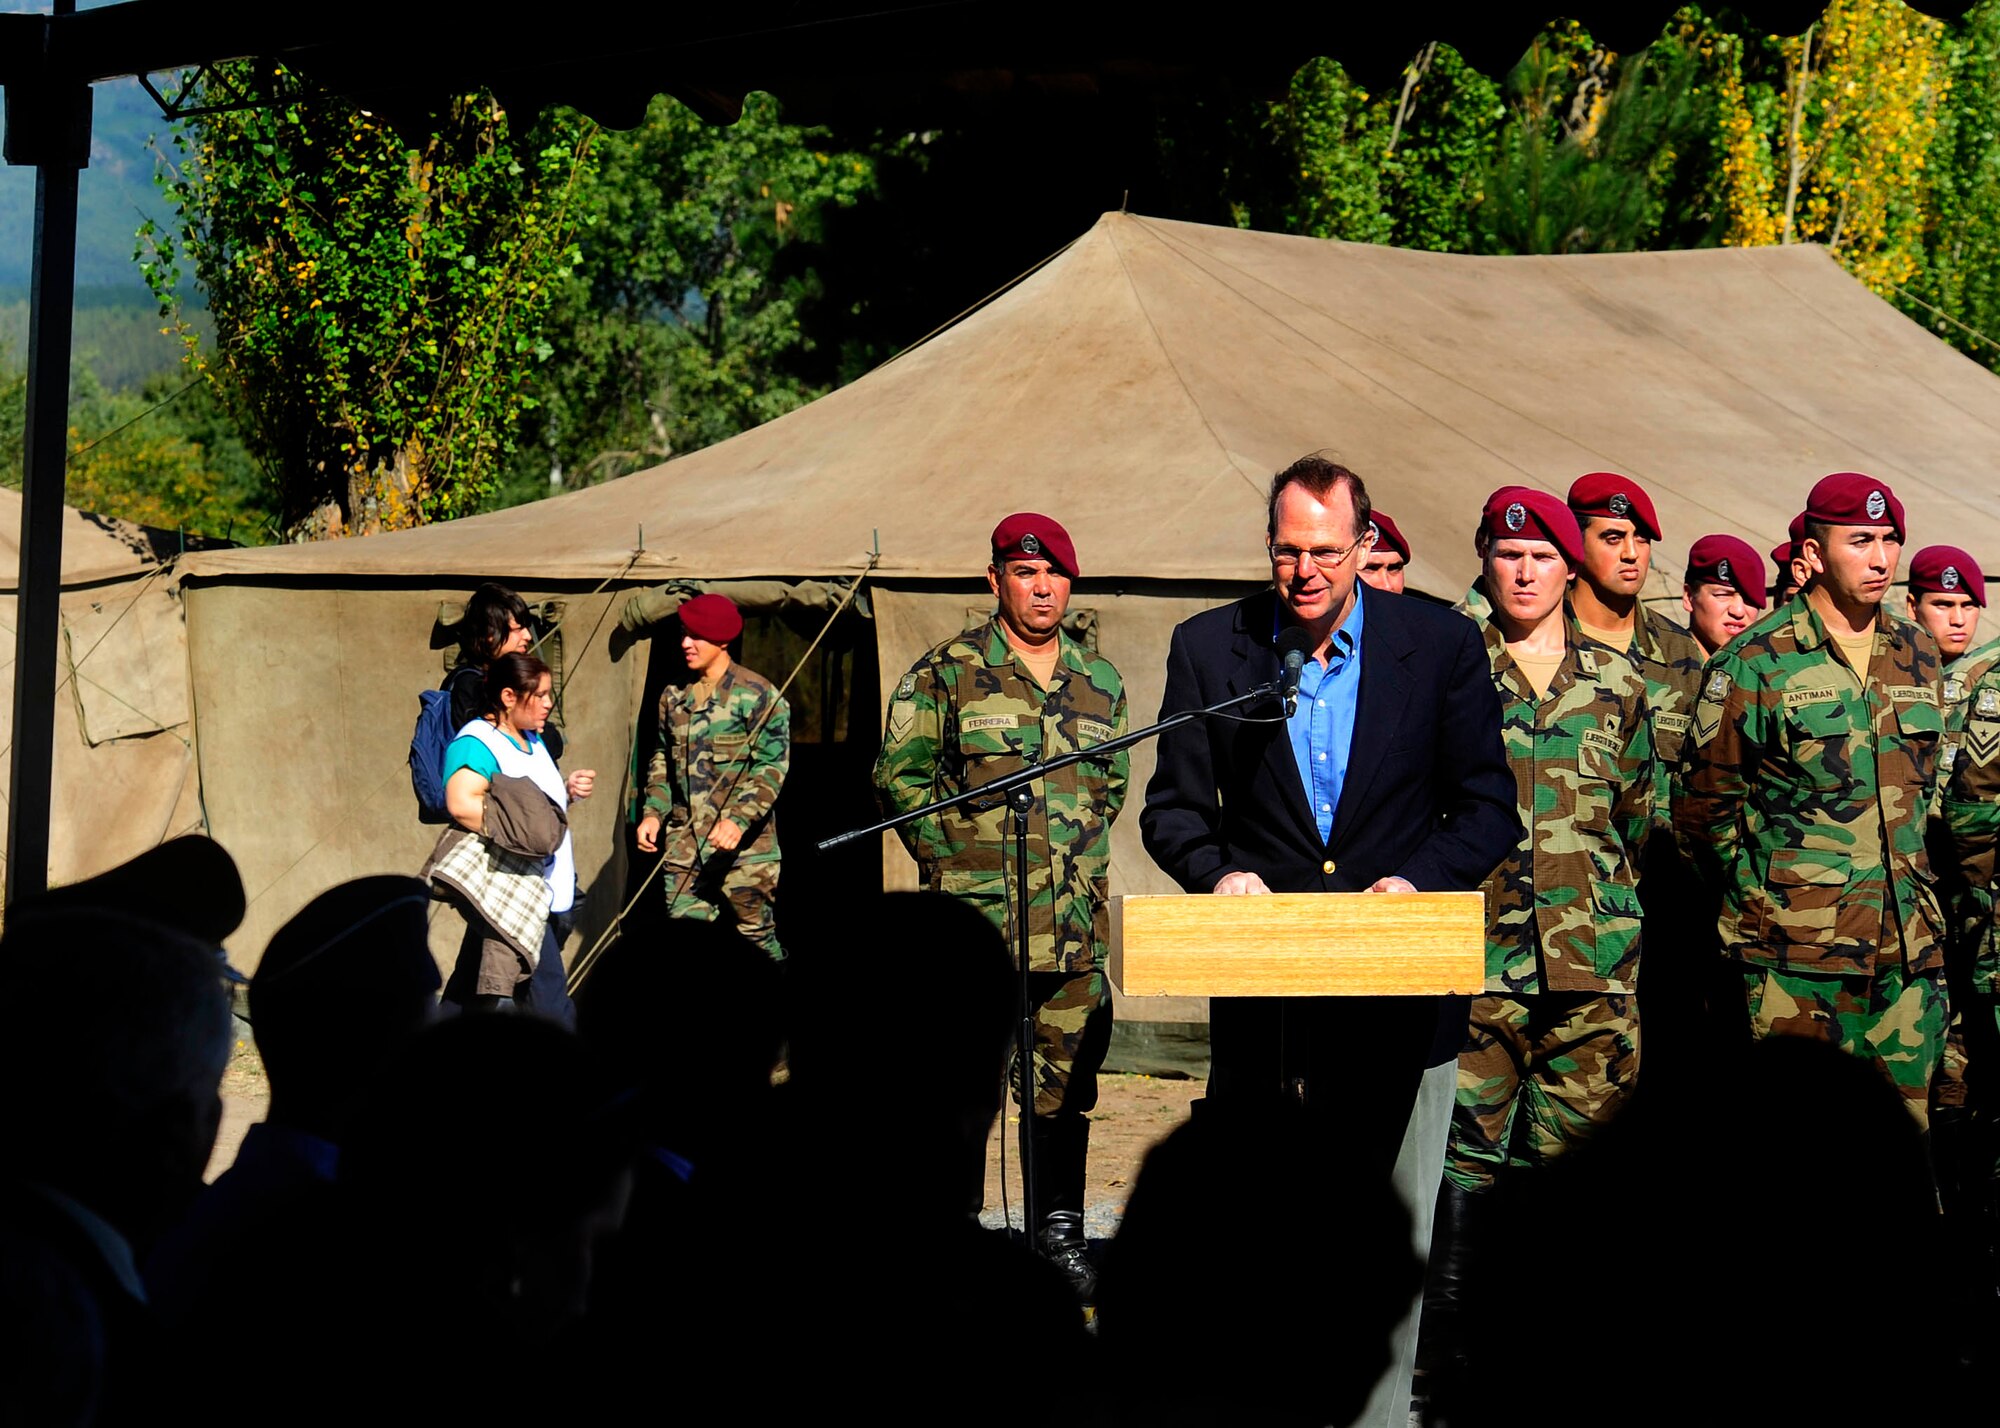 The U.S. Ambassador to Chile, Paul Simons, speaks during the donation ceremony of the expeditionary hospital to Angol citizens March 24, 2010, in Angol, Chile. While the local hospital in Angol is being rebuilt, this medical facility will provide much needed space to provide medical care for the nearly 110,000 in the Angol region. (U.S. Air Force photo/Senior Airman Tiffany Trojca)